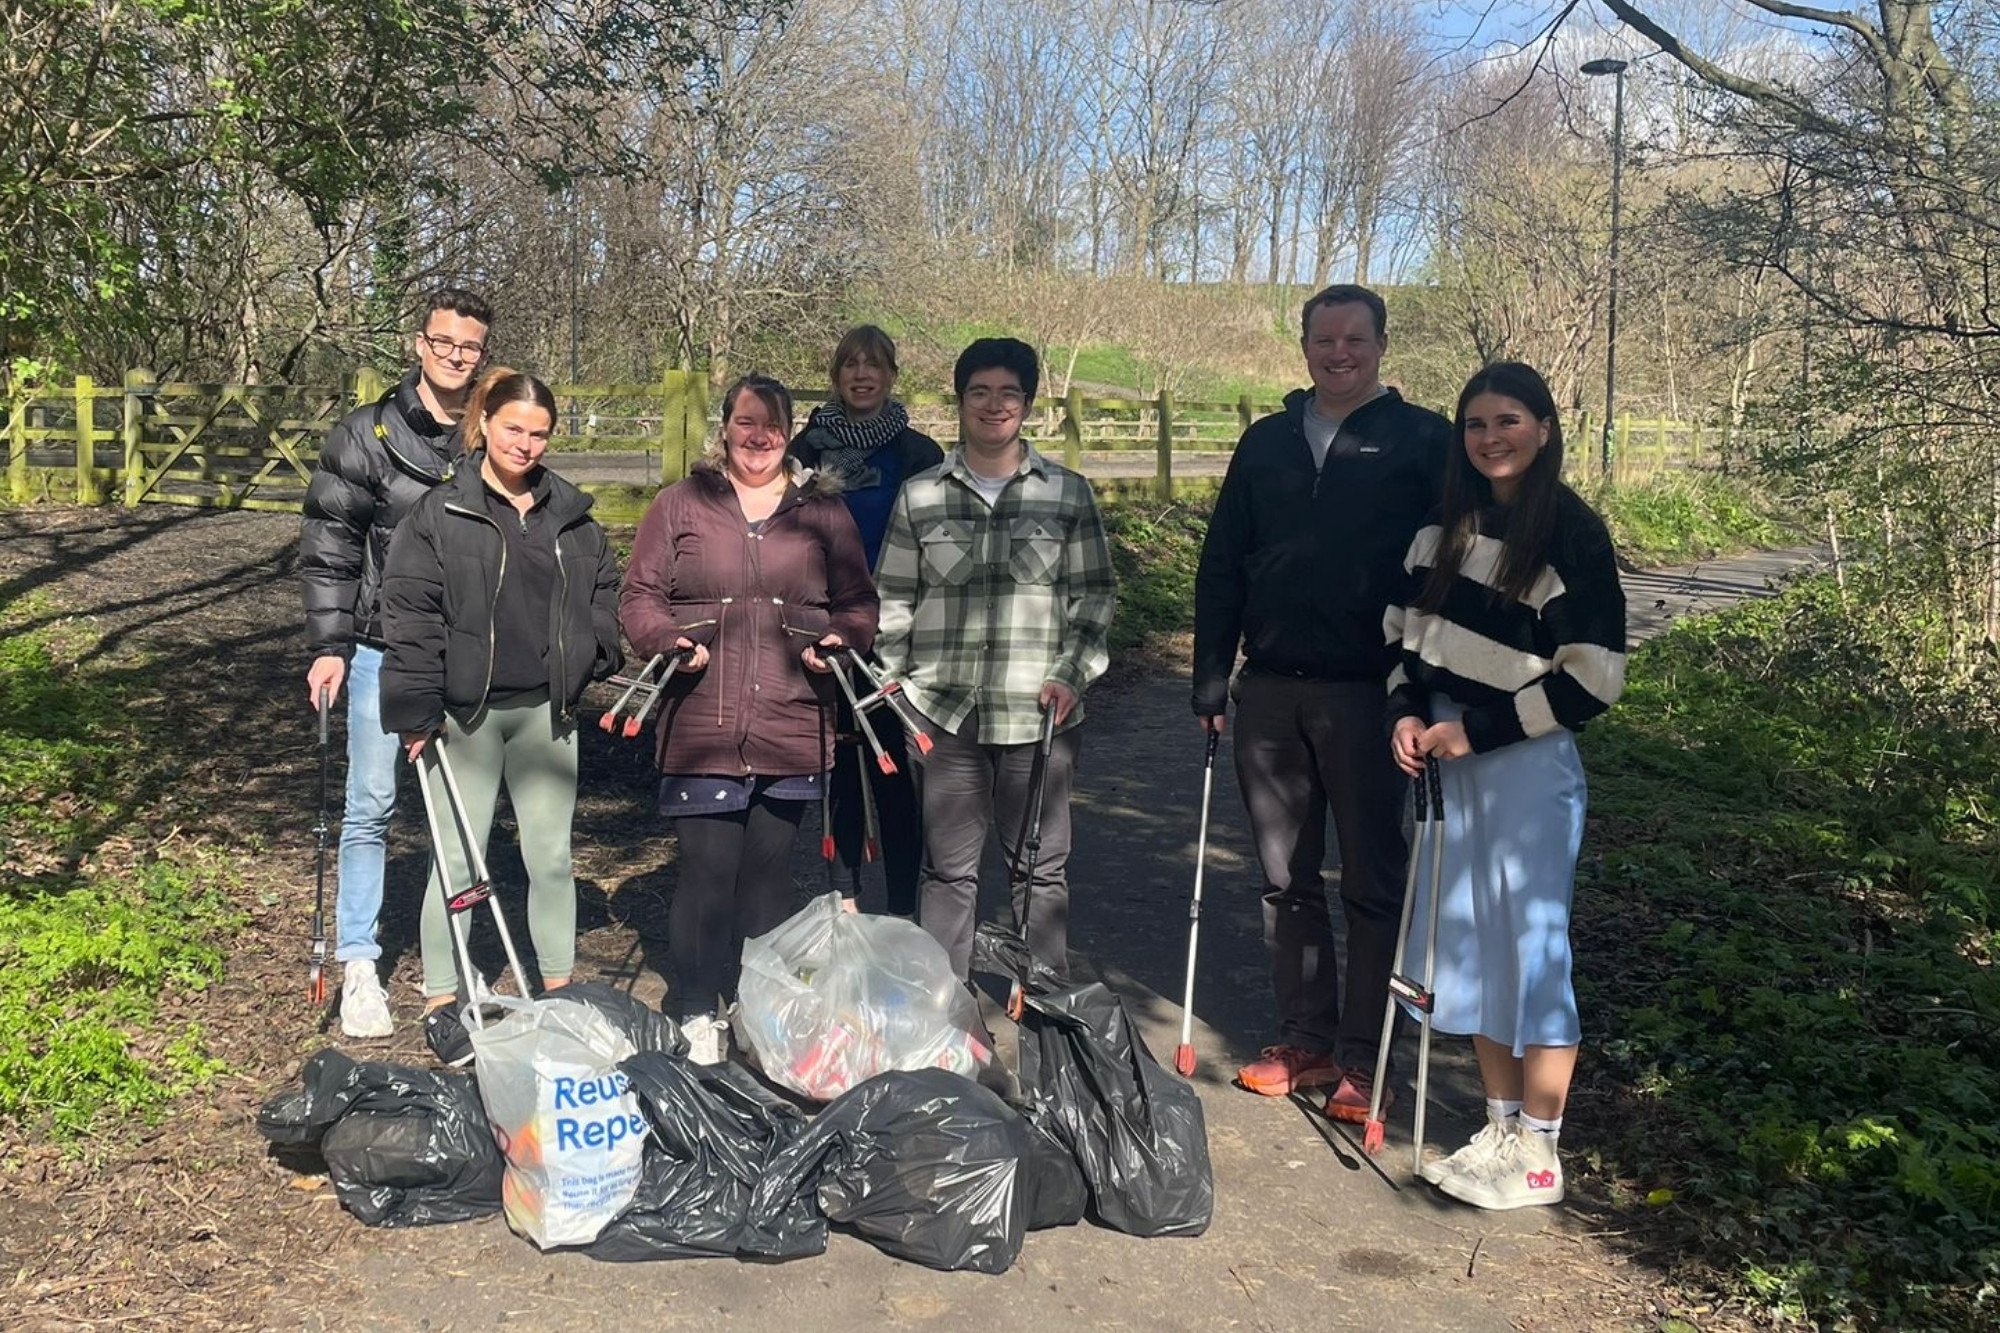 Left to right: Tom, Rosie, Alannah, Alison, Dan, Matthew and Kaelan. Standing with the bags of rubbish we have collected.